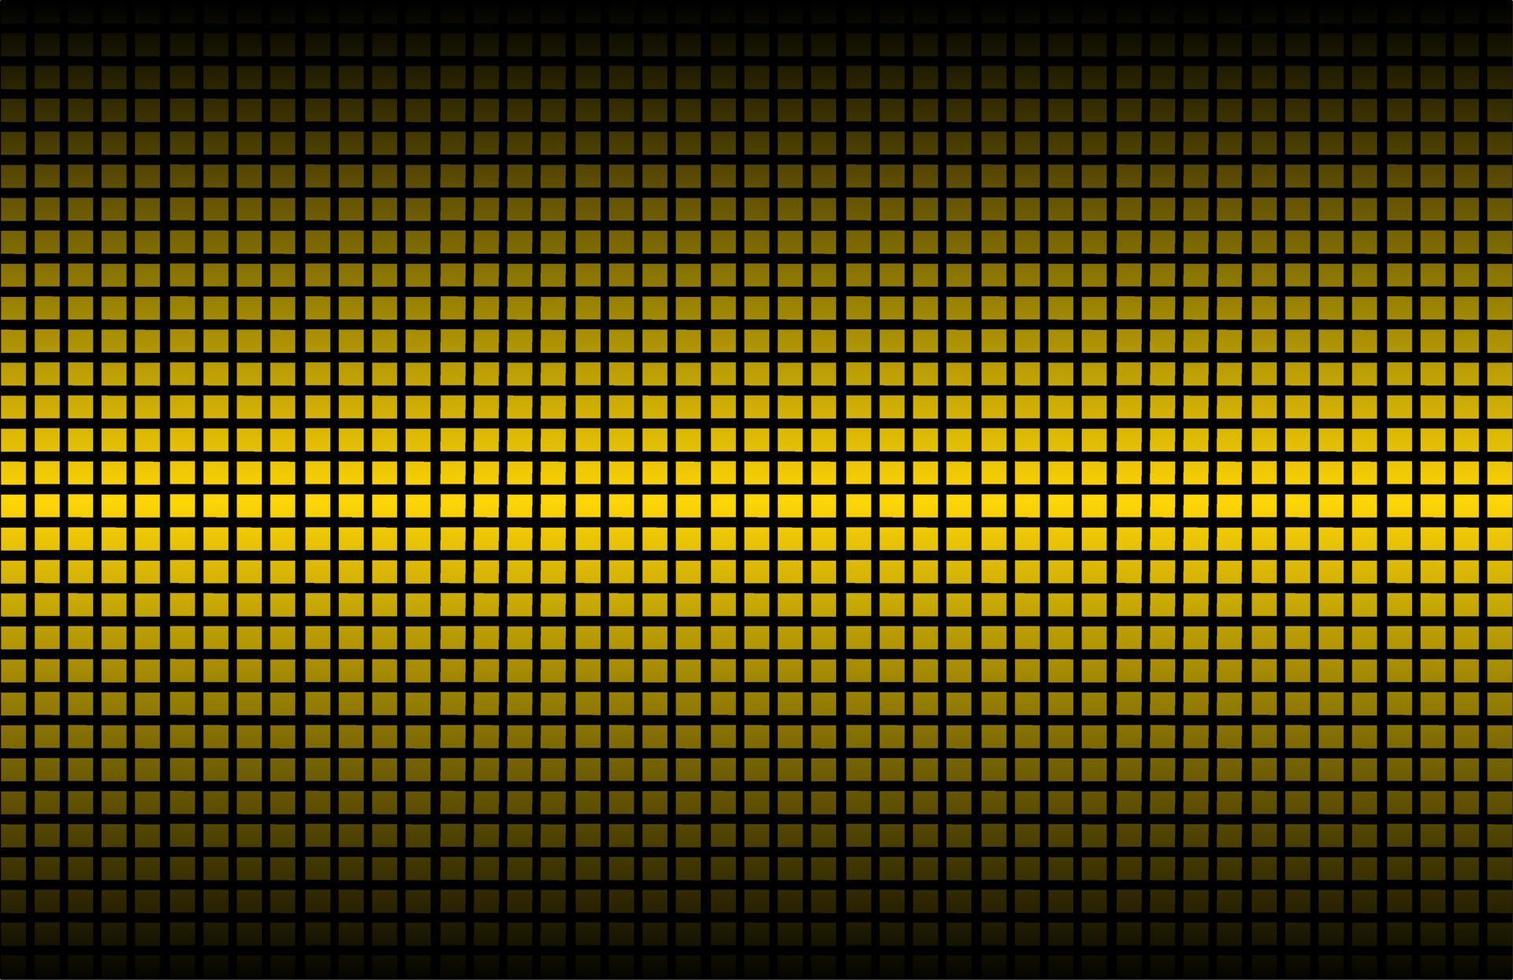 led video wall screen texture background vector